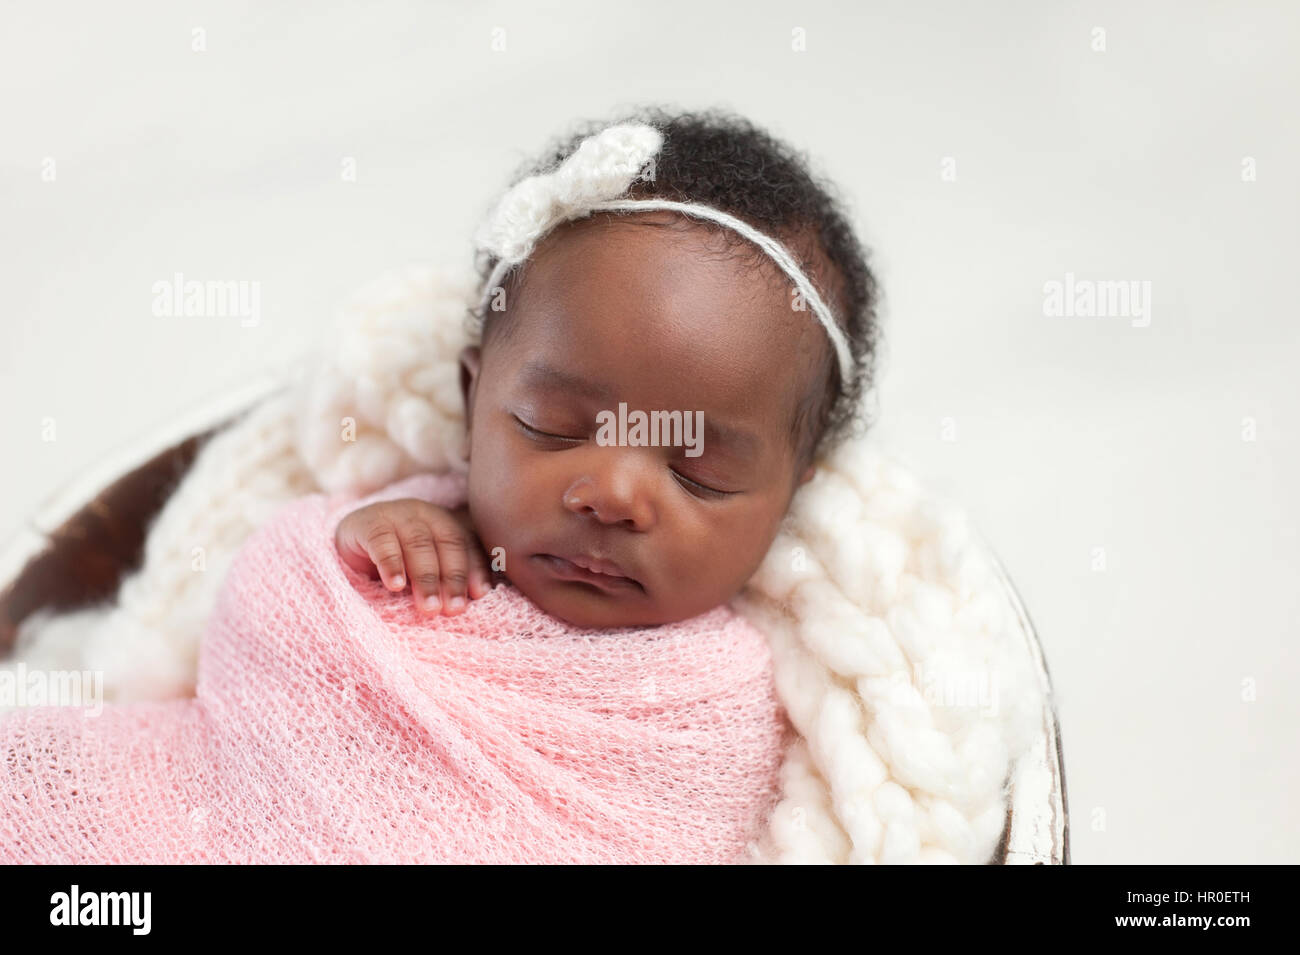 Portrait of a one month old, sleeping, newborn, baby girl. She is swaddled in pink and sleeping in a tiny bucket. Stock Photo